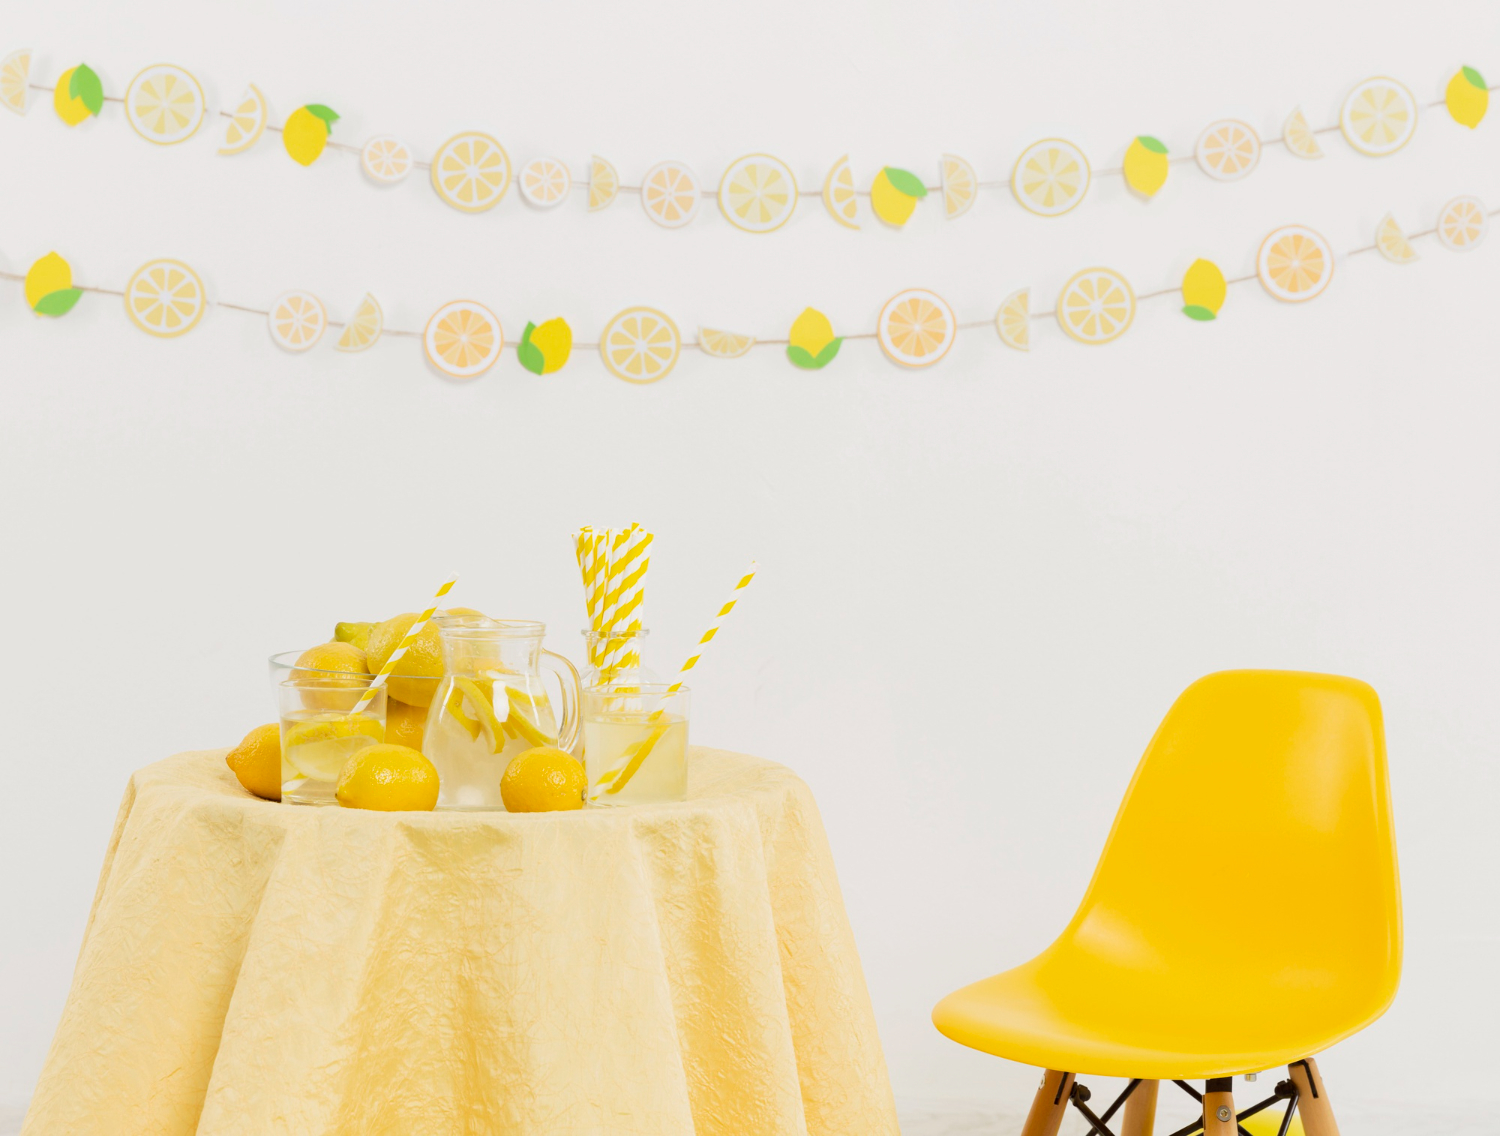 A vibrant yellow tablecloth sets the stage for a joyous celebration at the Fruitful Celebration Baby Shower Ideas.